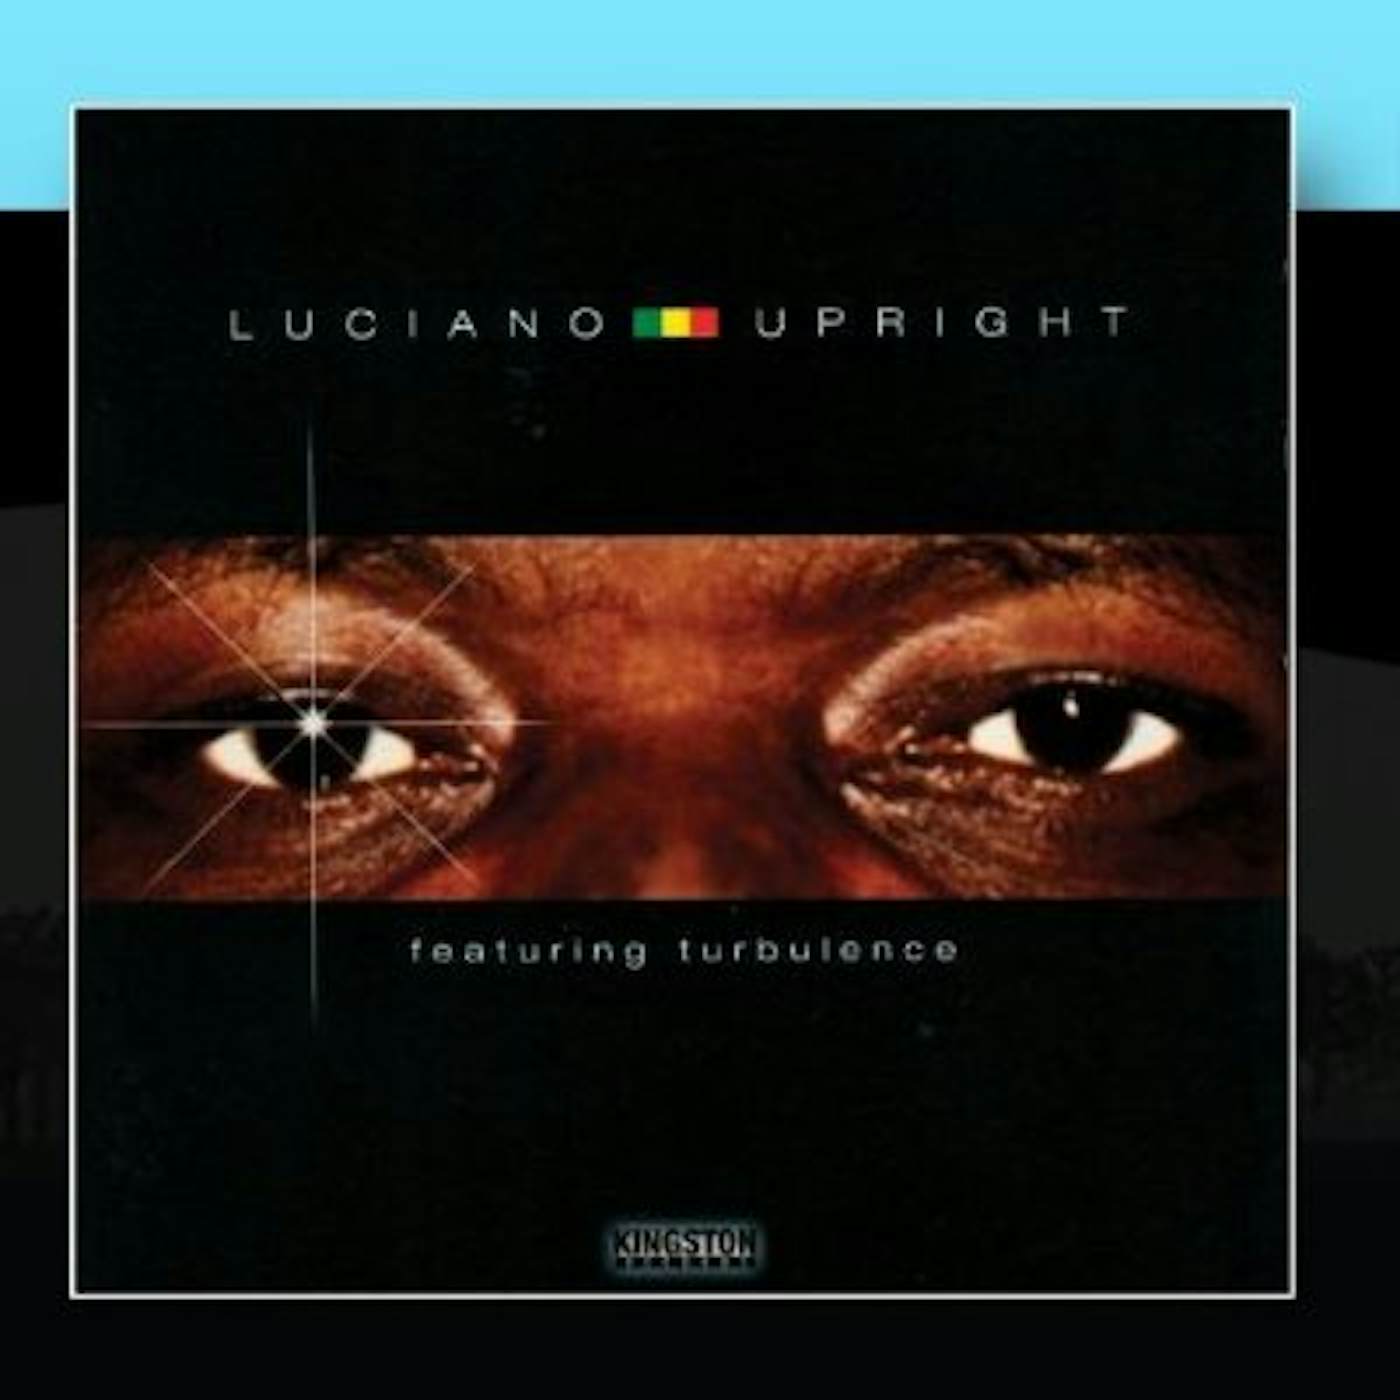 Luciano UPRIGHT CD